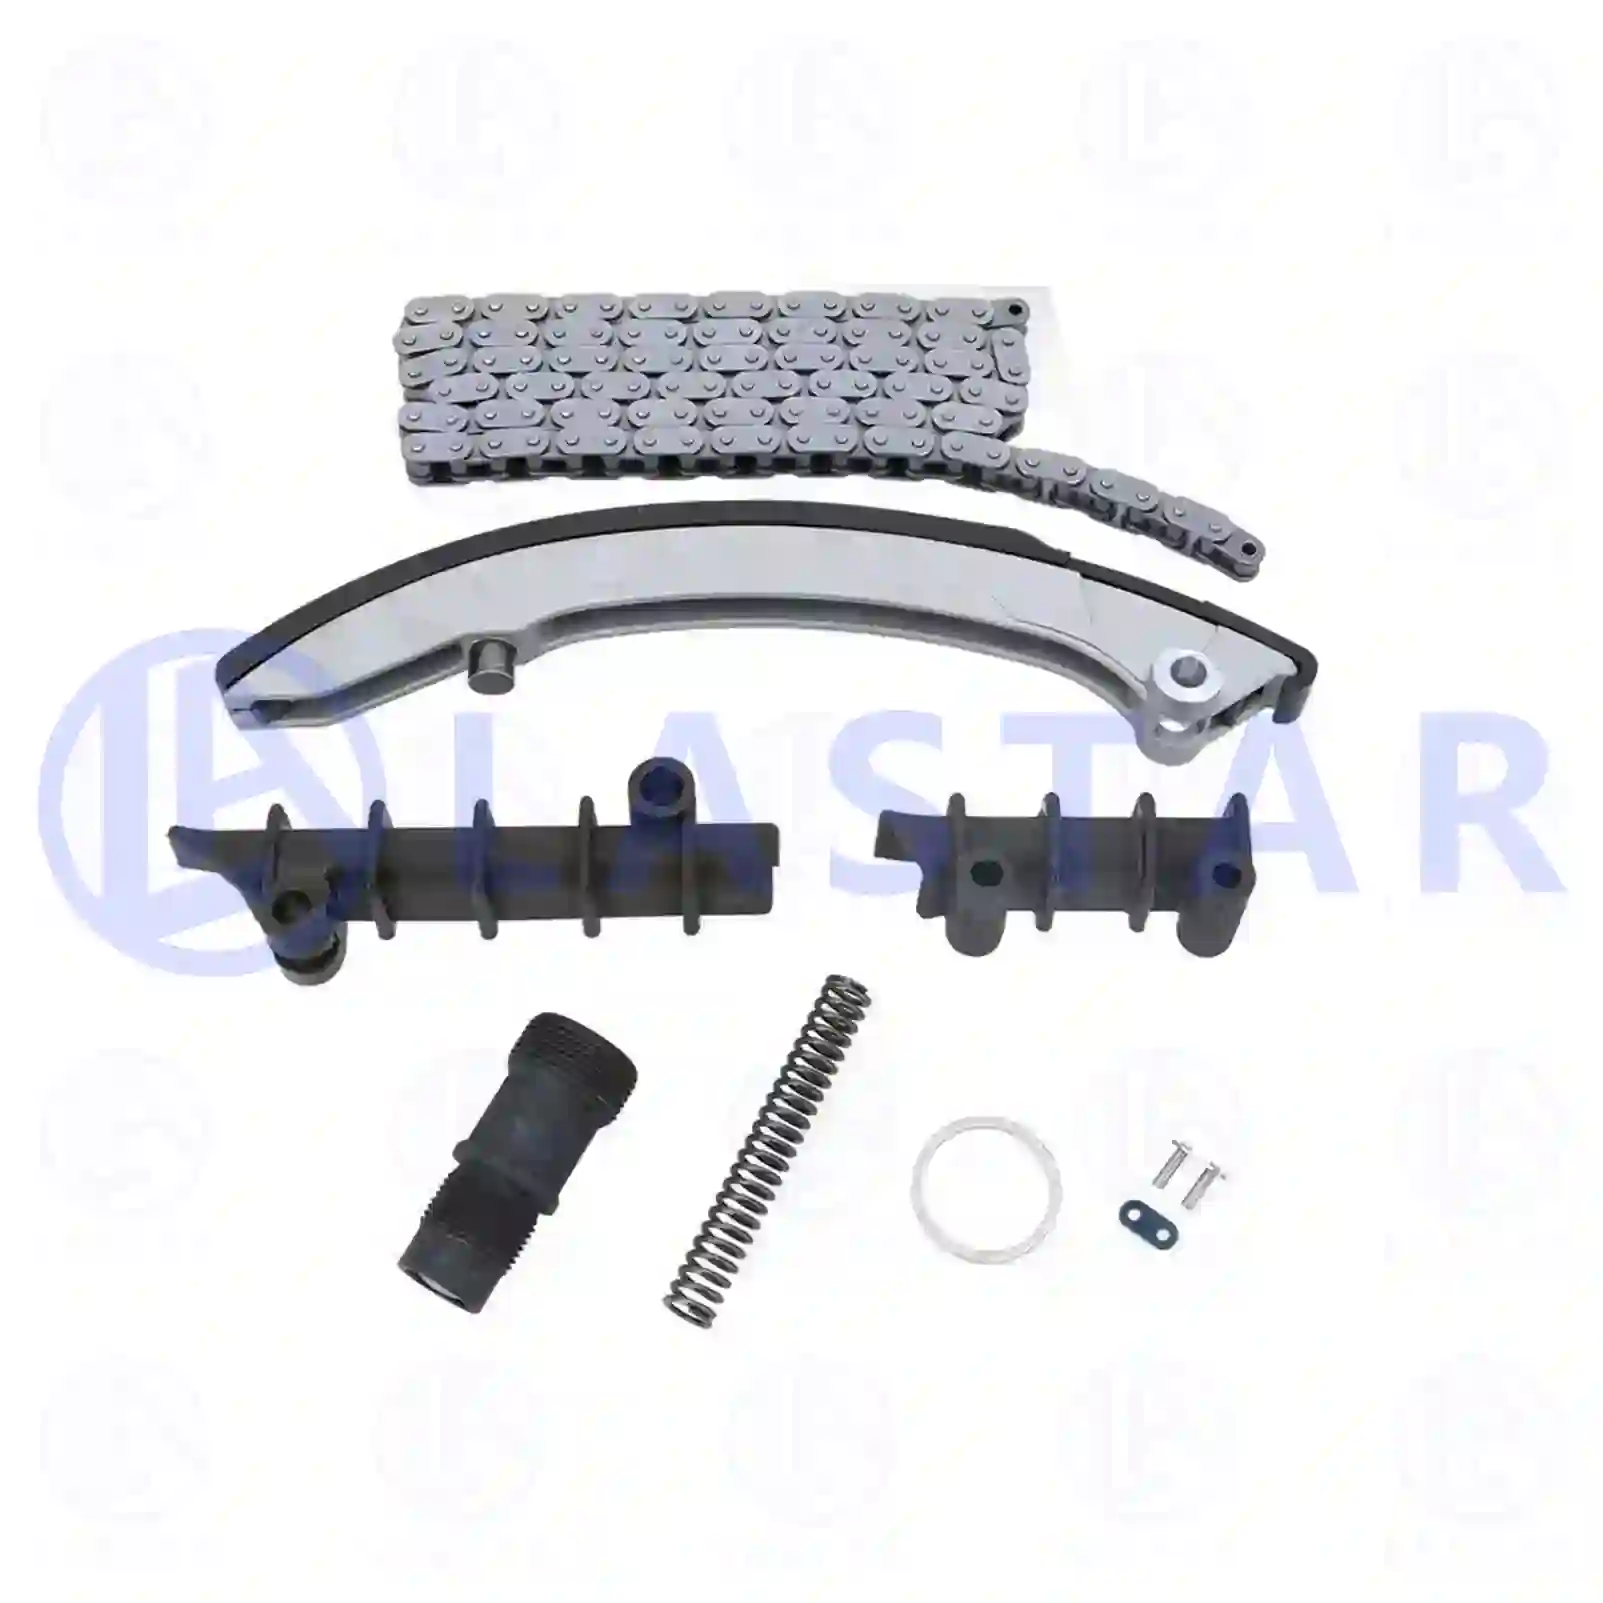 Timing chain kit, 77702657, 1020501011S1 ||  77702657 Lastar Spare Part | Truck Spare Parts, Auotomotive Spare Parts Timing chain kit, 77702657, 1020501011S1 ||  77702657 Lastar Spare Part | Truck Spare Parts, Auotomotive Spare Parts